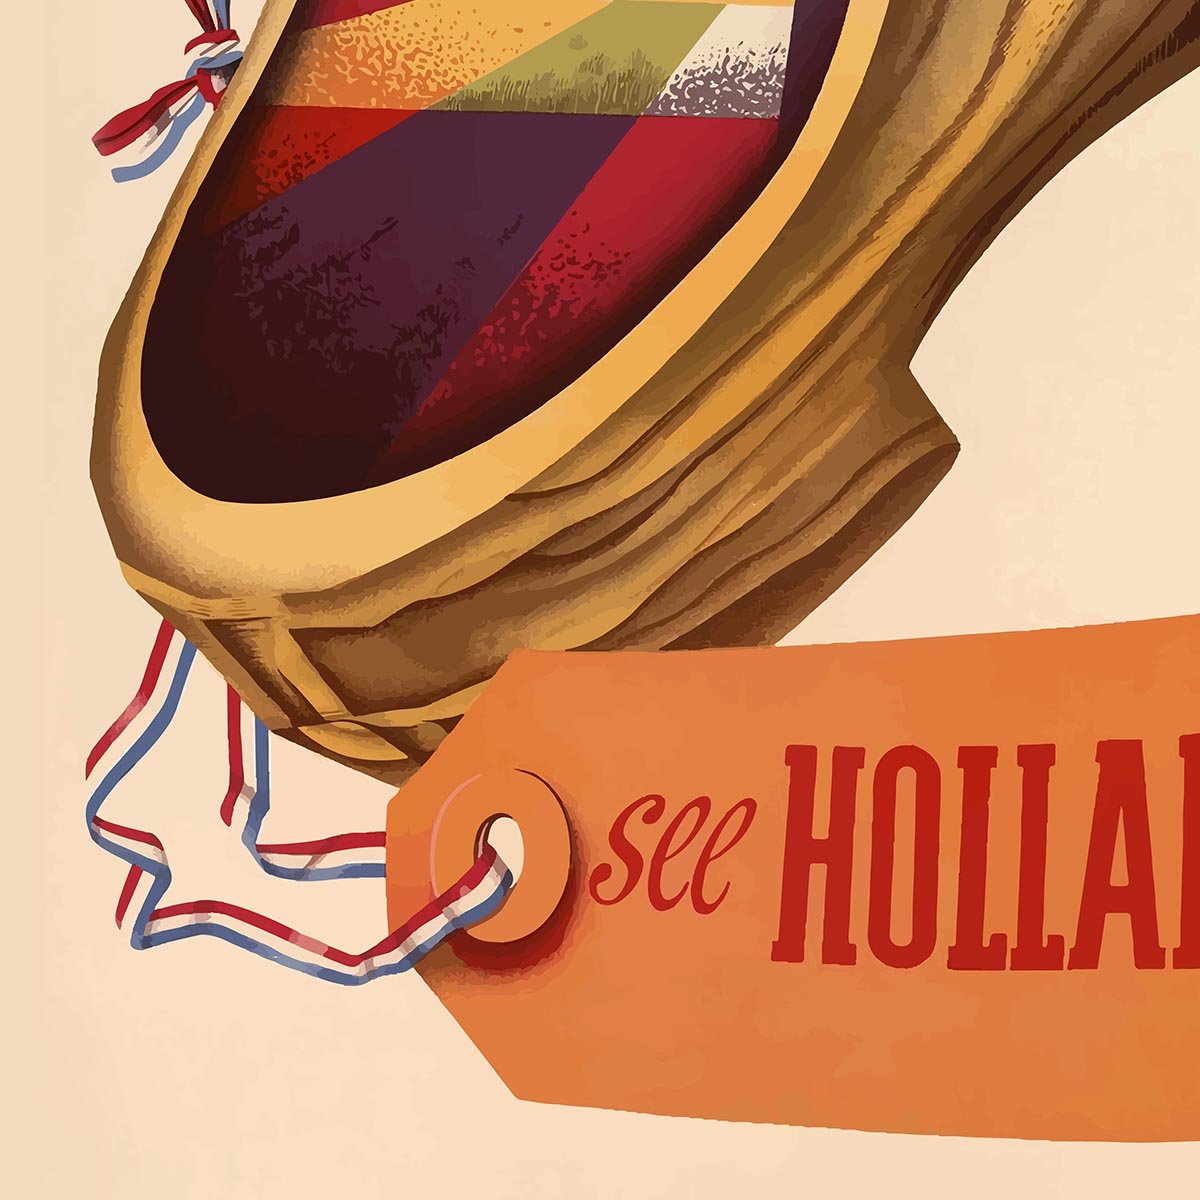 Holland Travel Poster